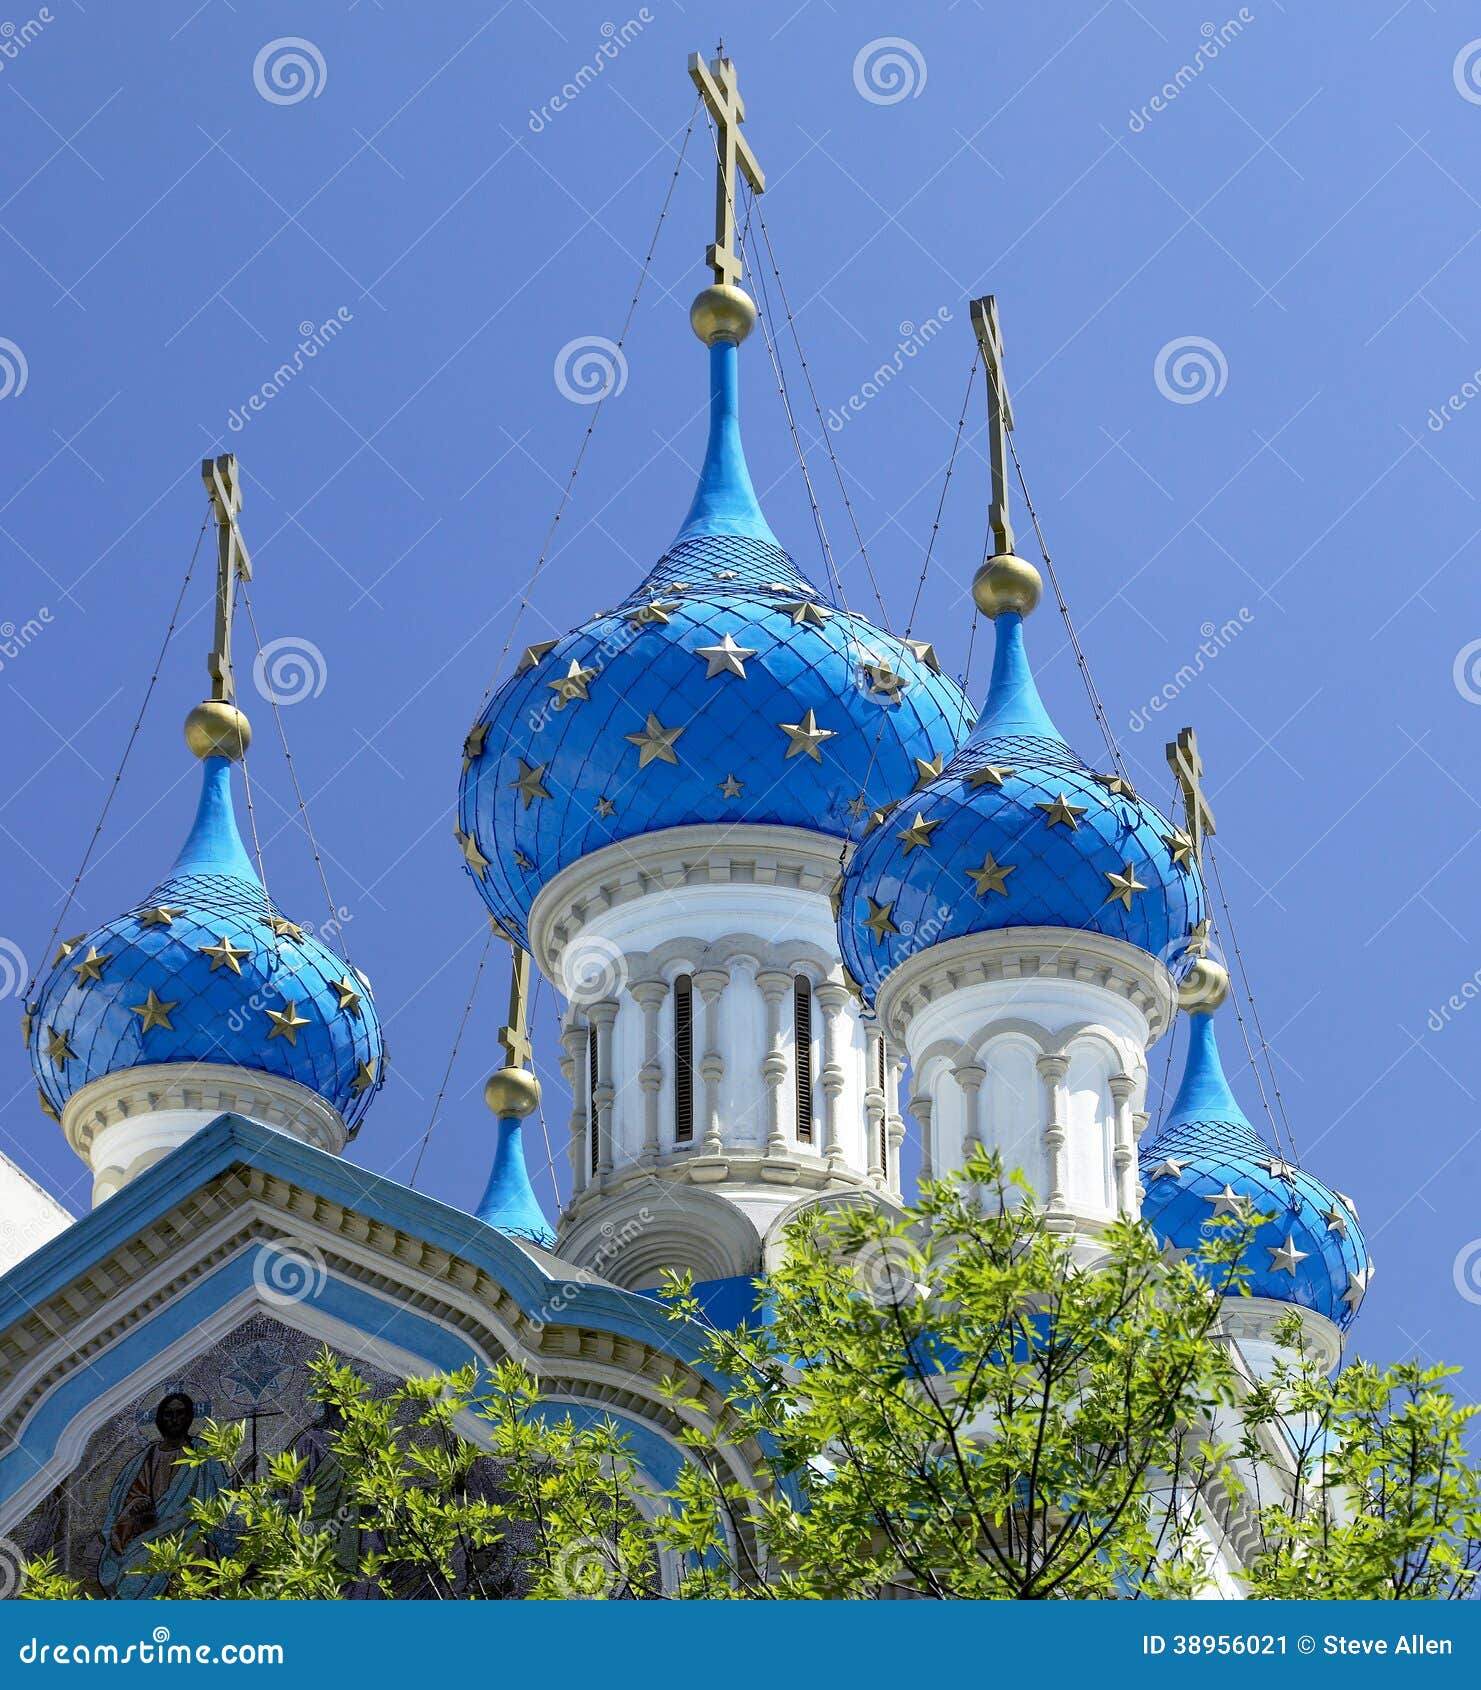 onion domed church - buenos aires - argentina